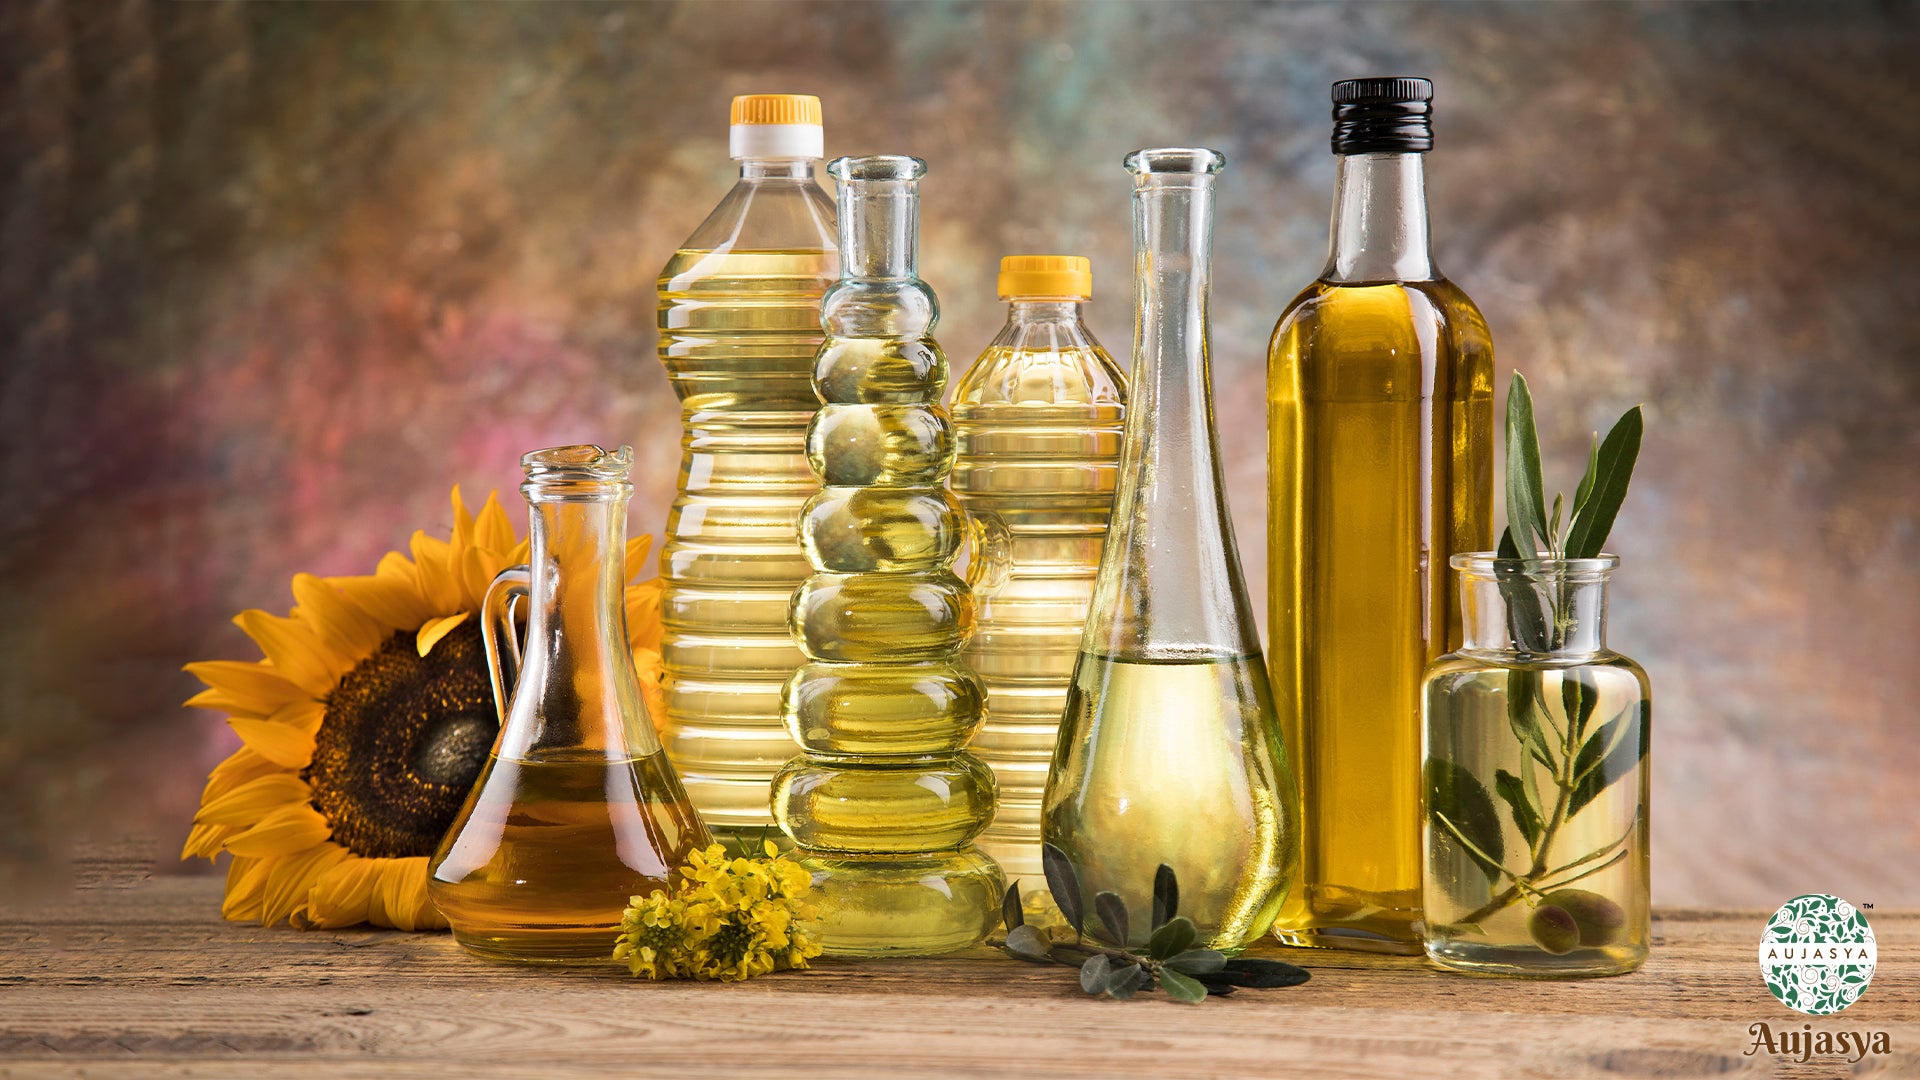 What is Wood-Pressed Oils and their Benefits